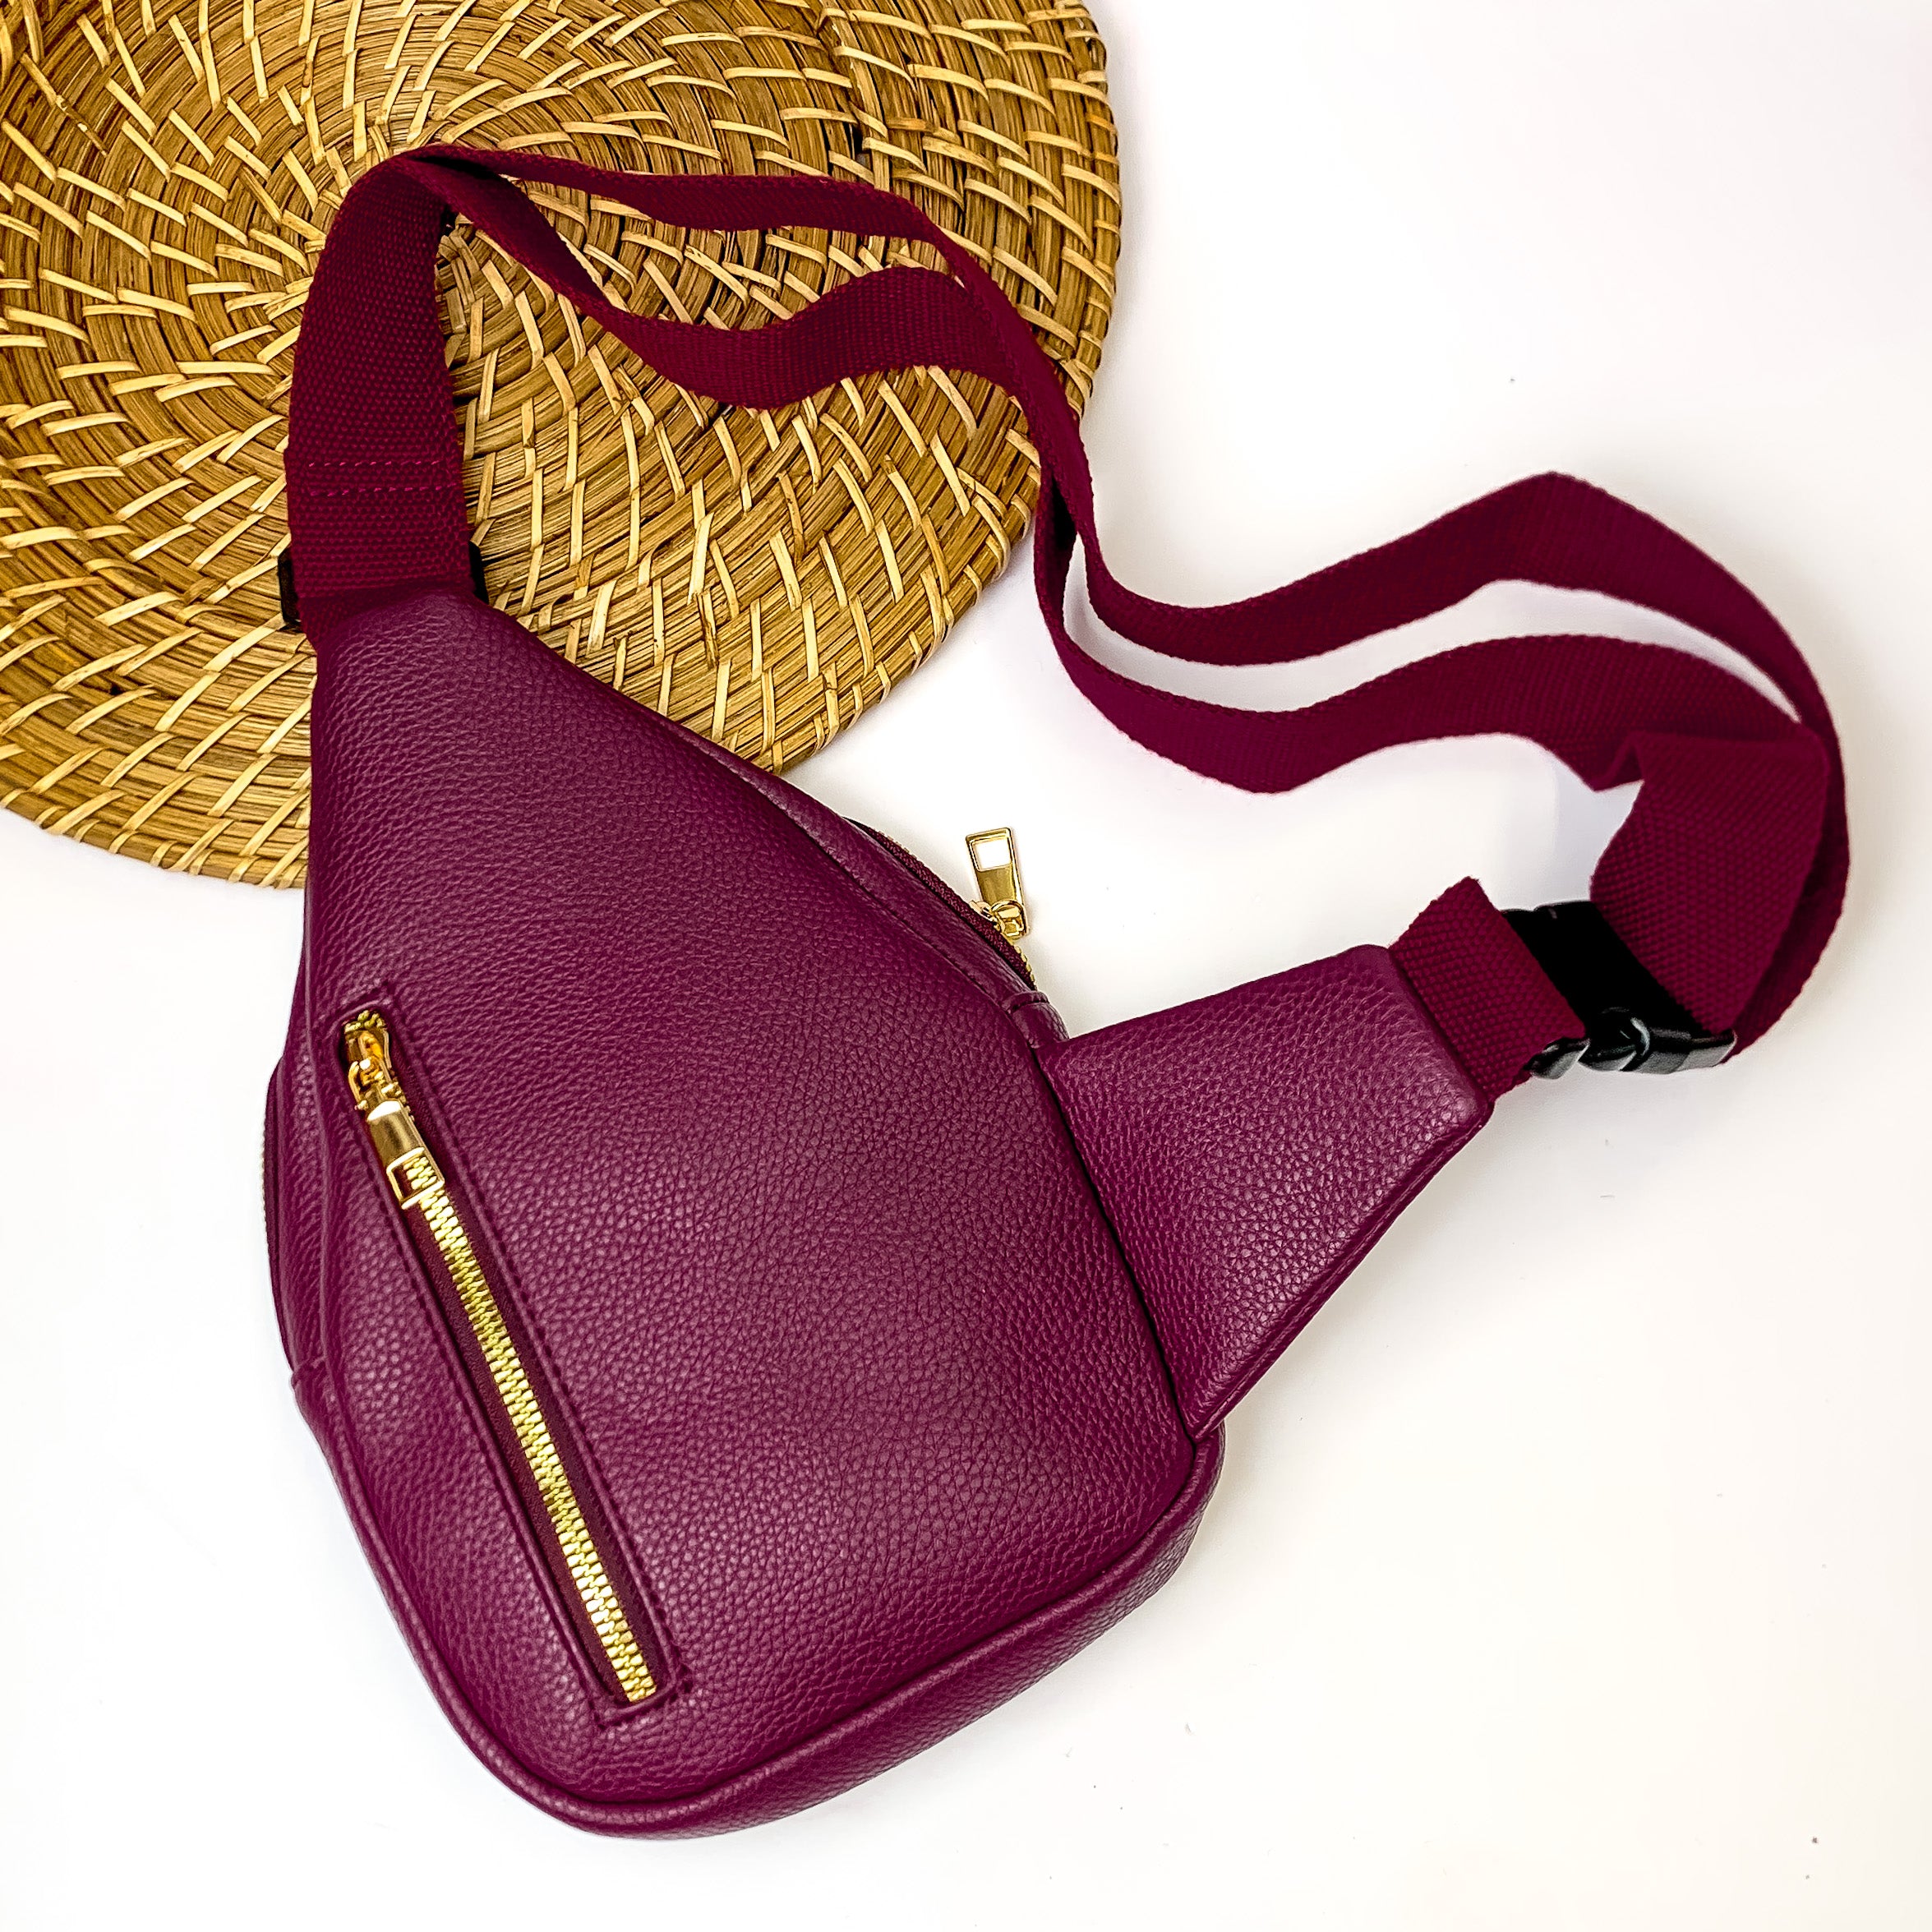 Sling Backpack in Wine Red